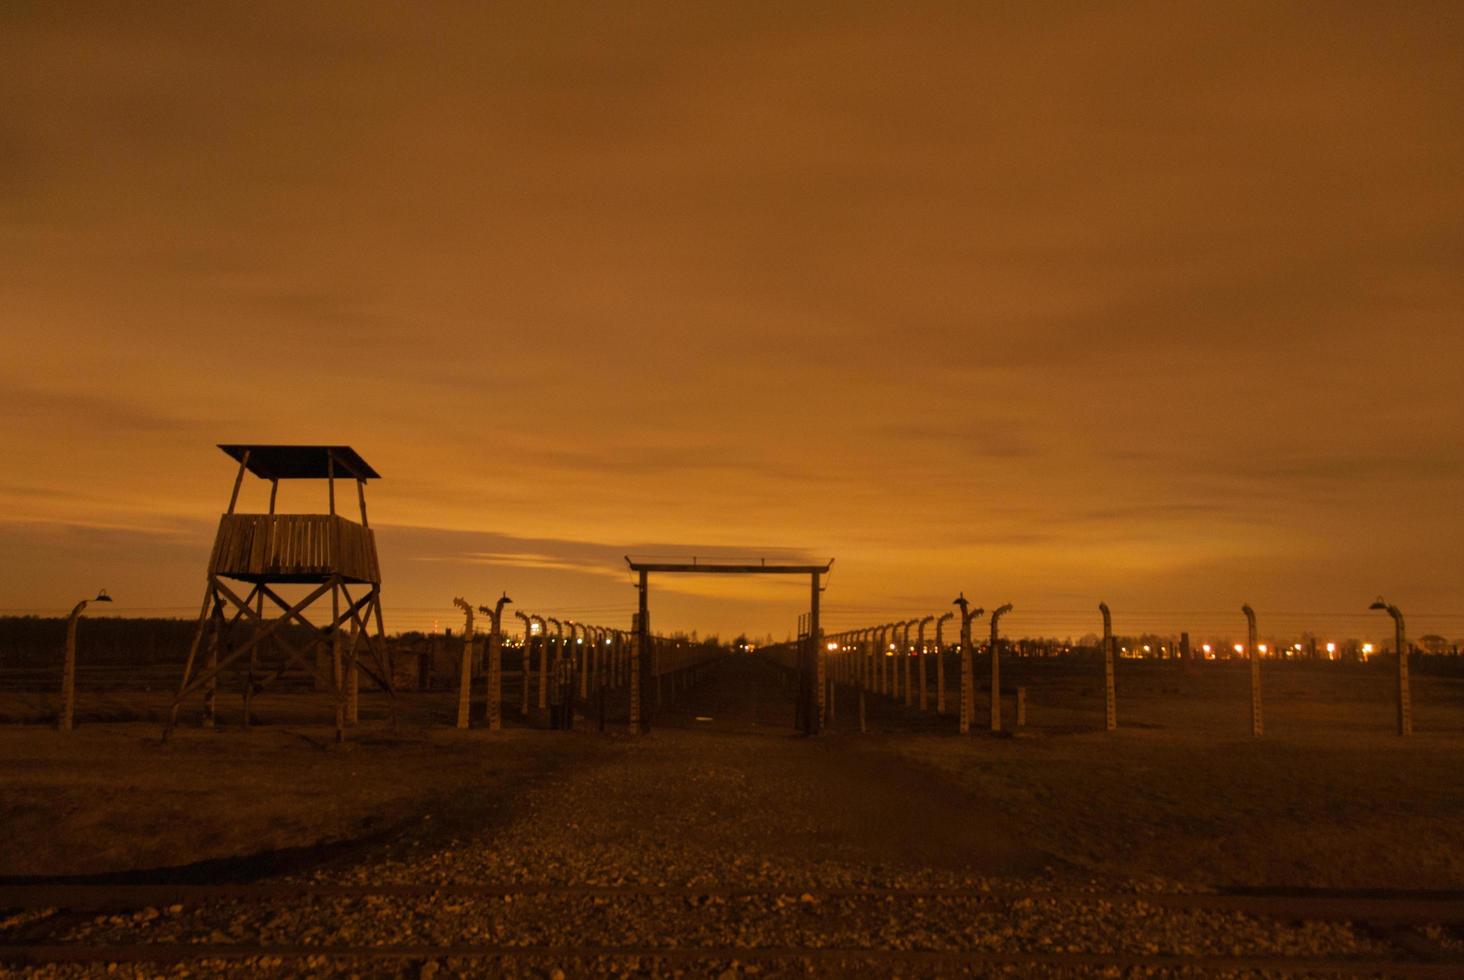 Birkinau Concentration Camp at night with guard tower, 2022 photo